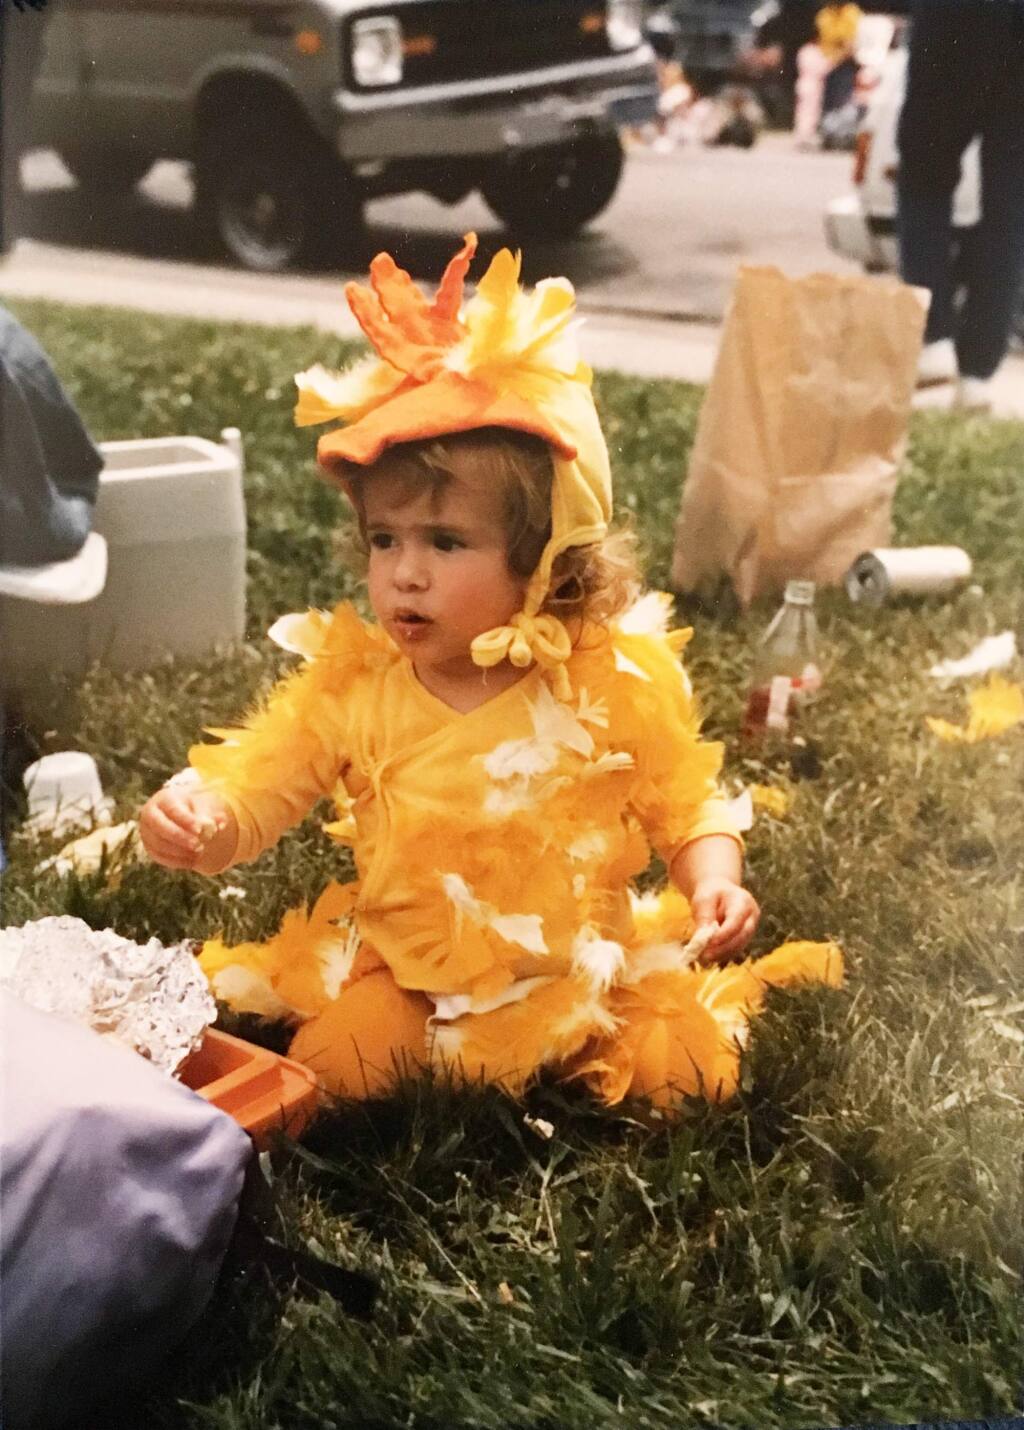 Collene Camill was the first Butter & Egg Days “Cutest Little Chick in Town” contest winner in 1989. (ARGUS-COURIER FILE)